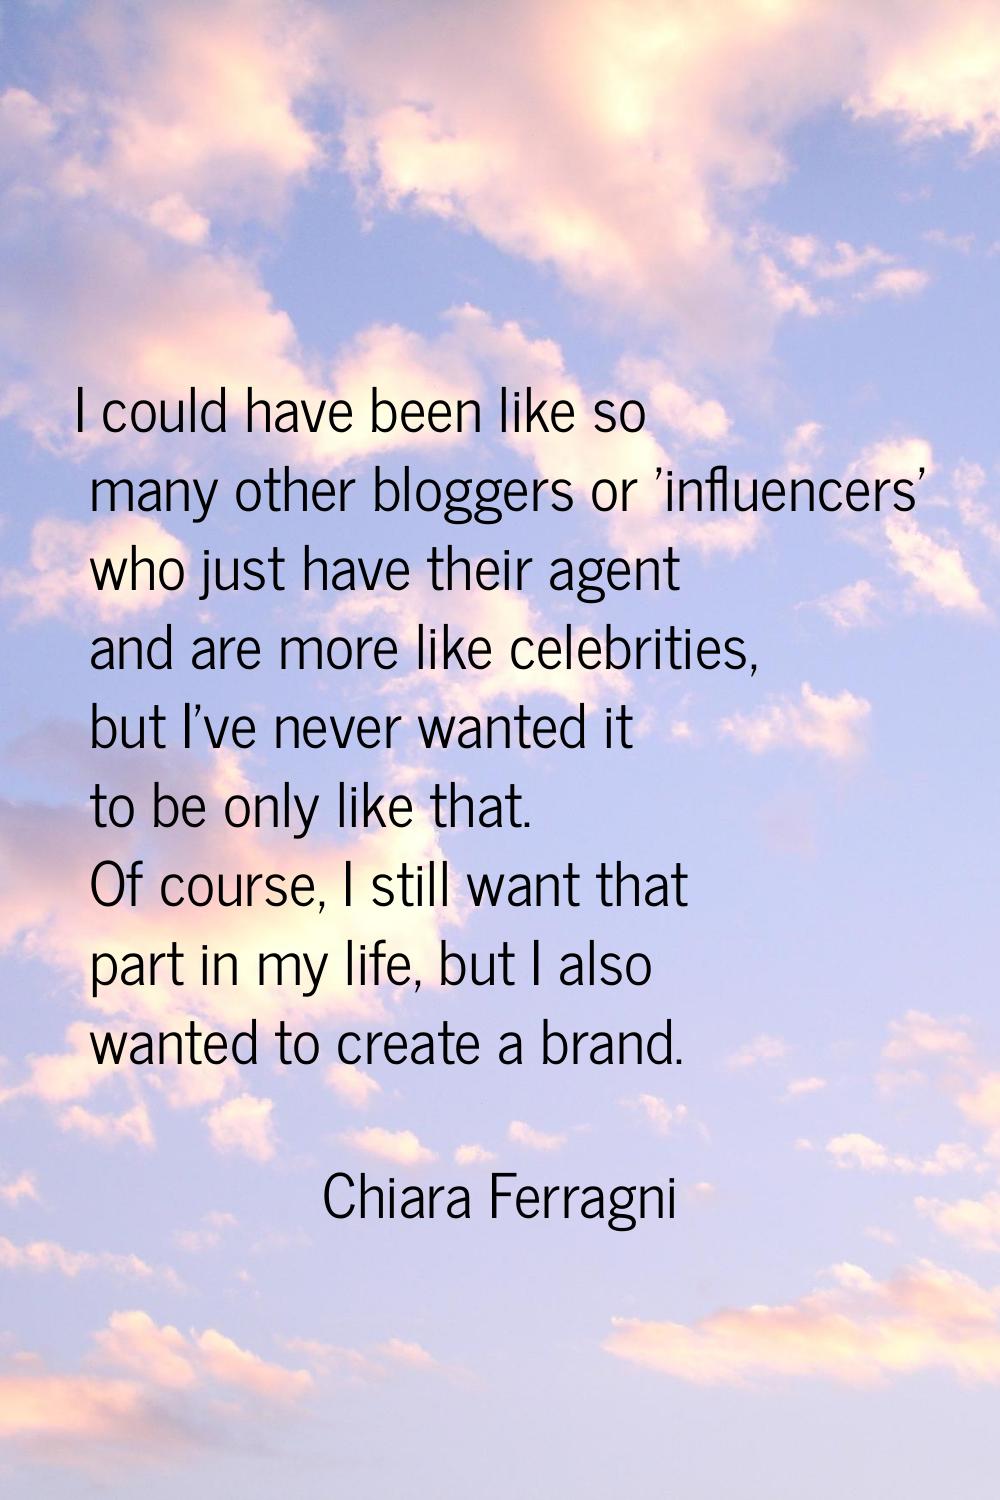 I could have been like so many other bloggers or 'influencers' who just have their agent and are mo